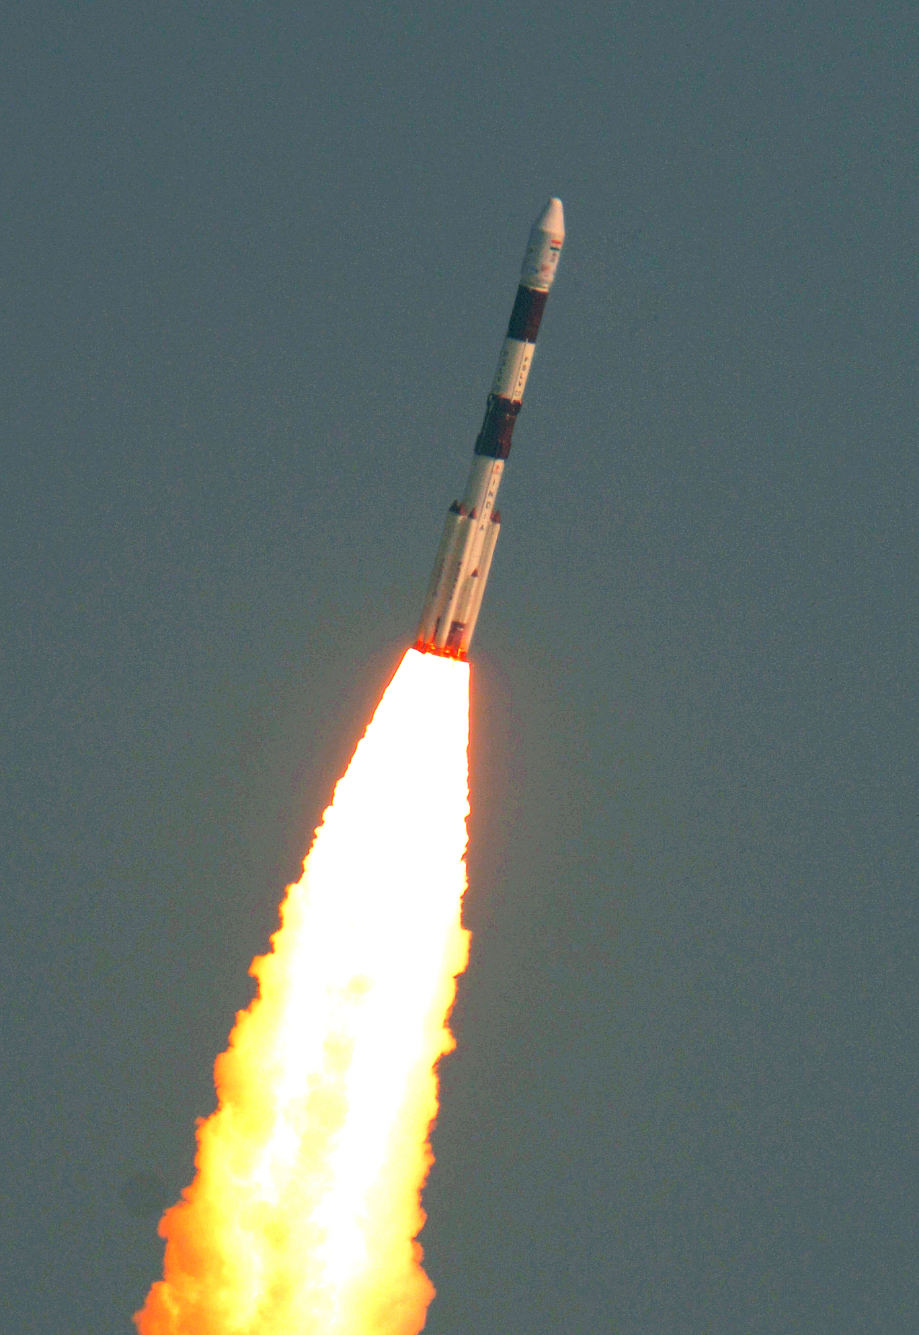 India's PSLV launches record 104 satellites in a single flight